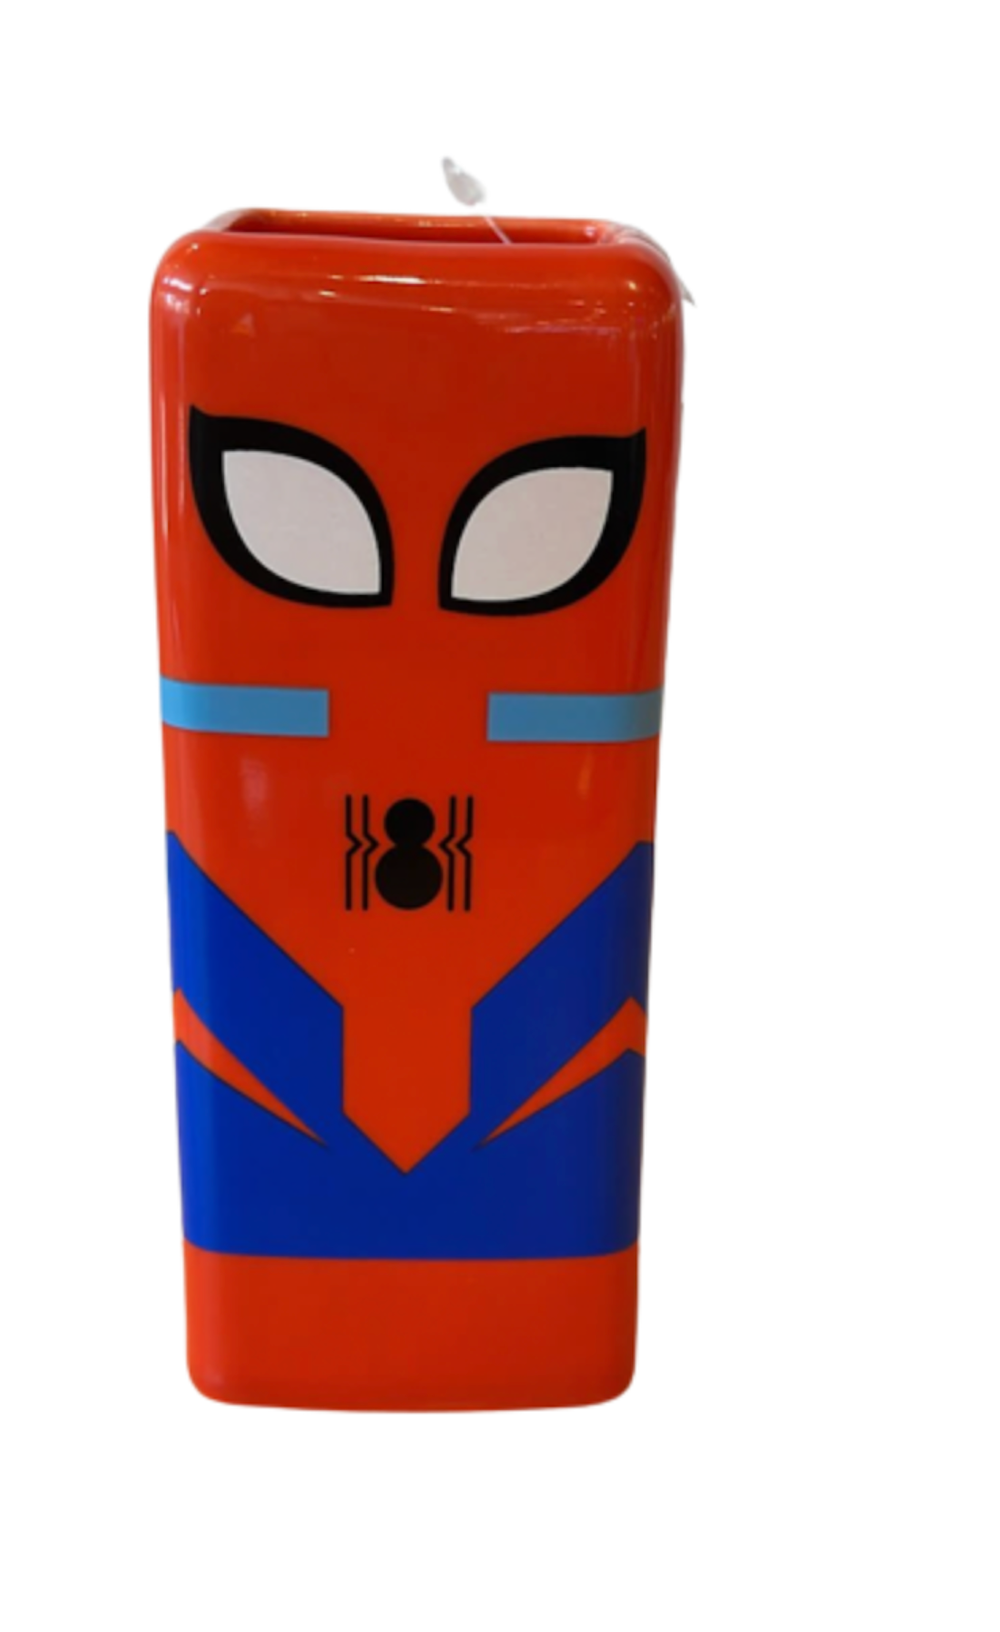 Disney 100 Years Celebration Spider-Man Pencil Holder Home Decor New with Tag